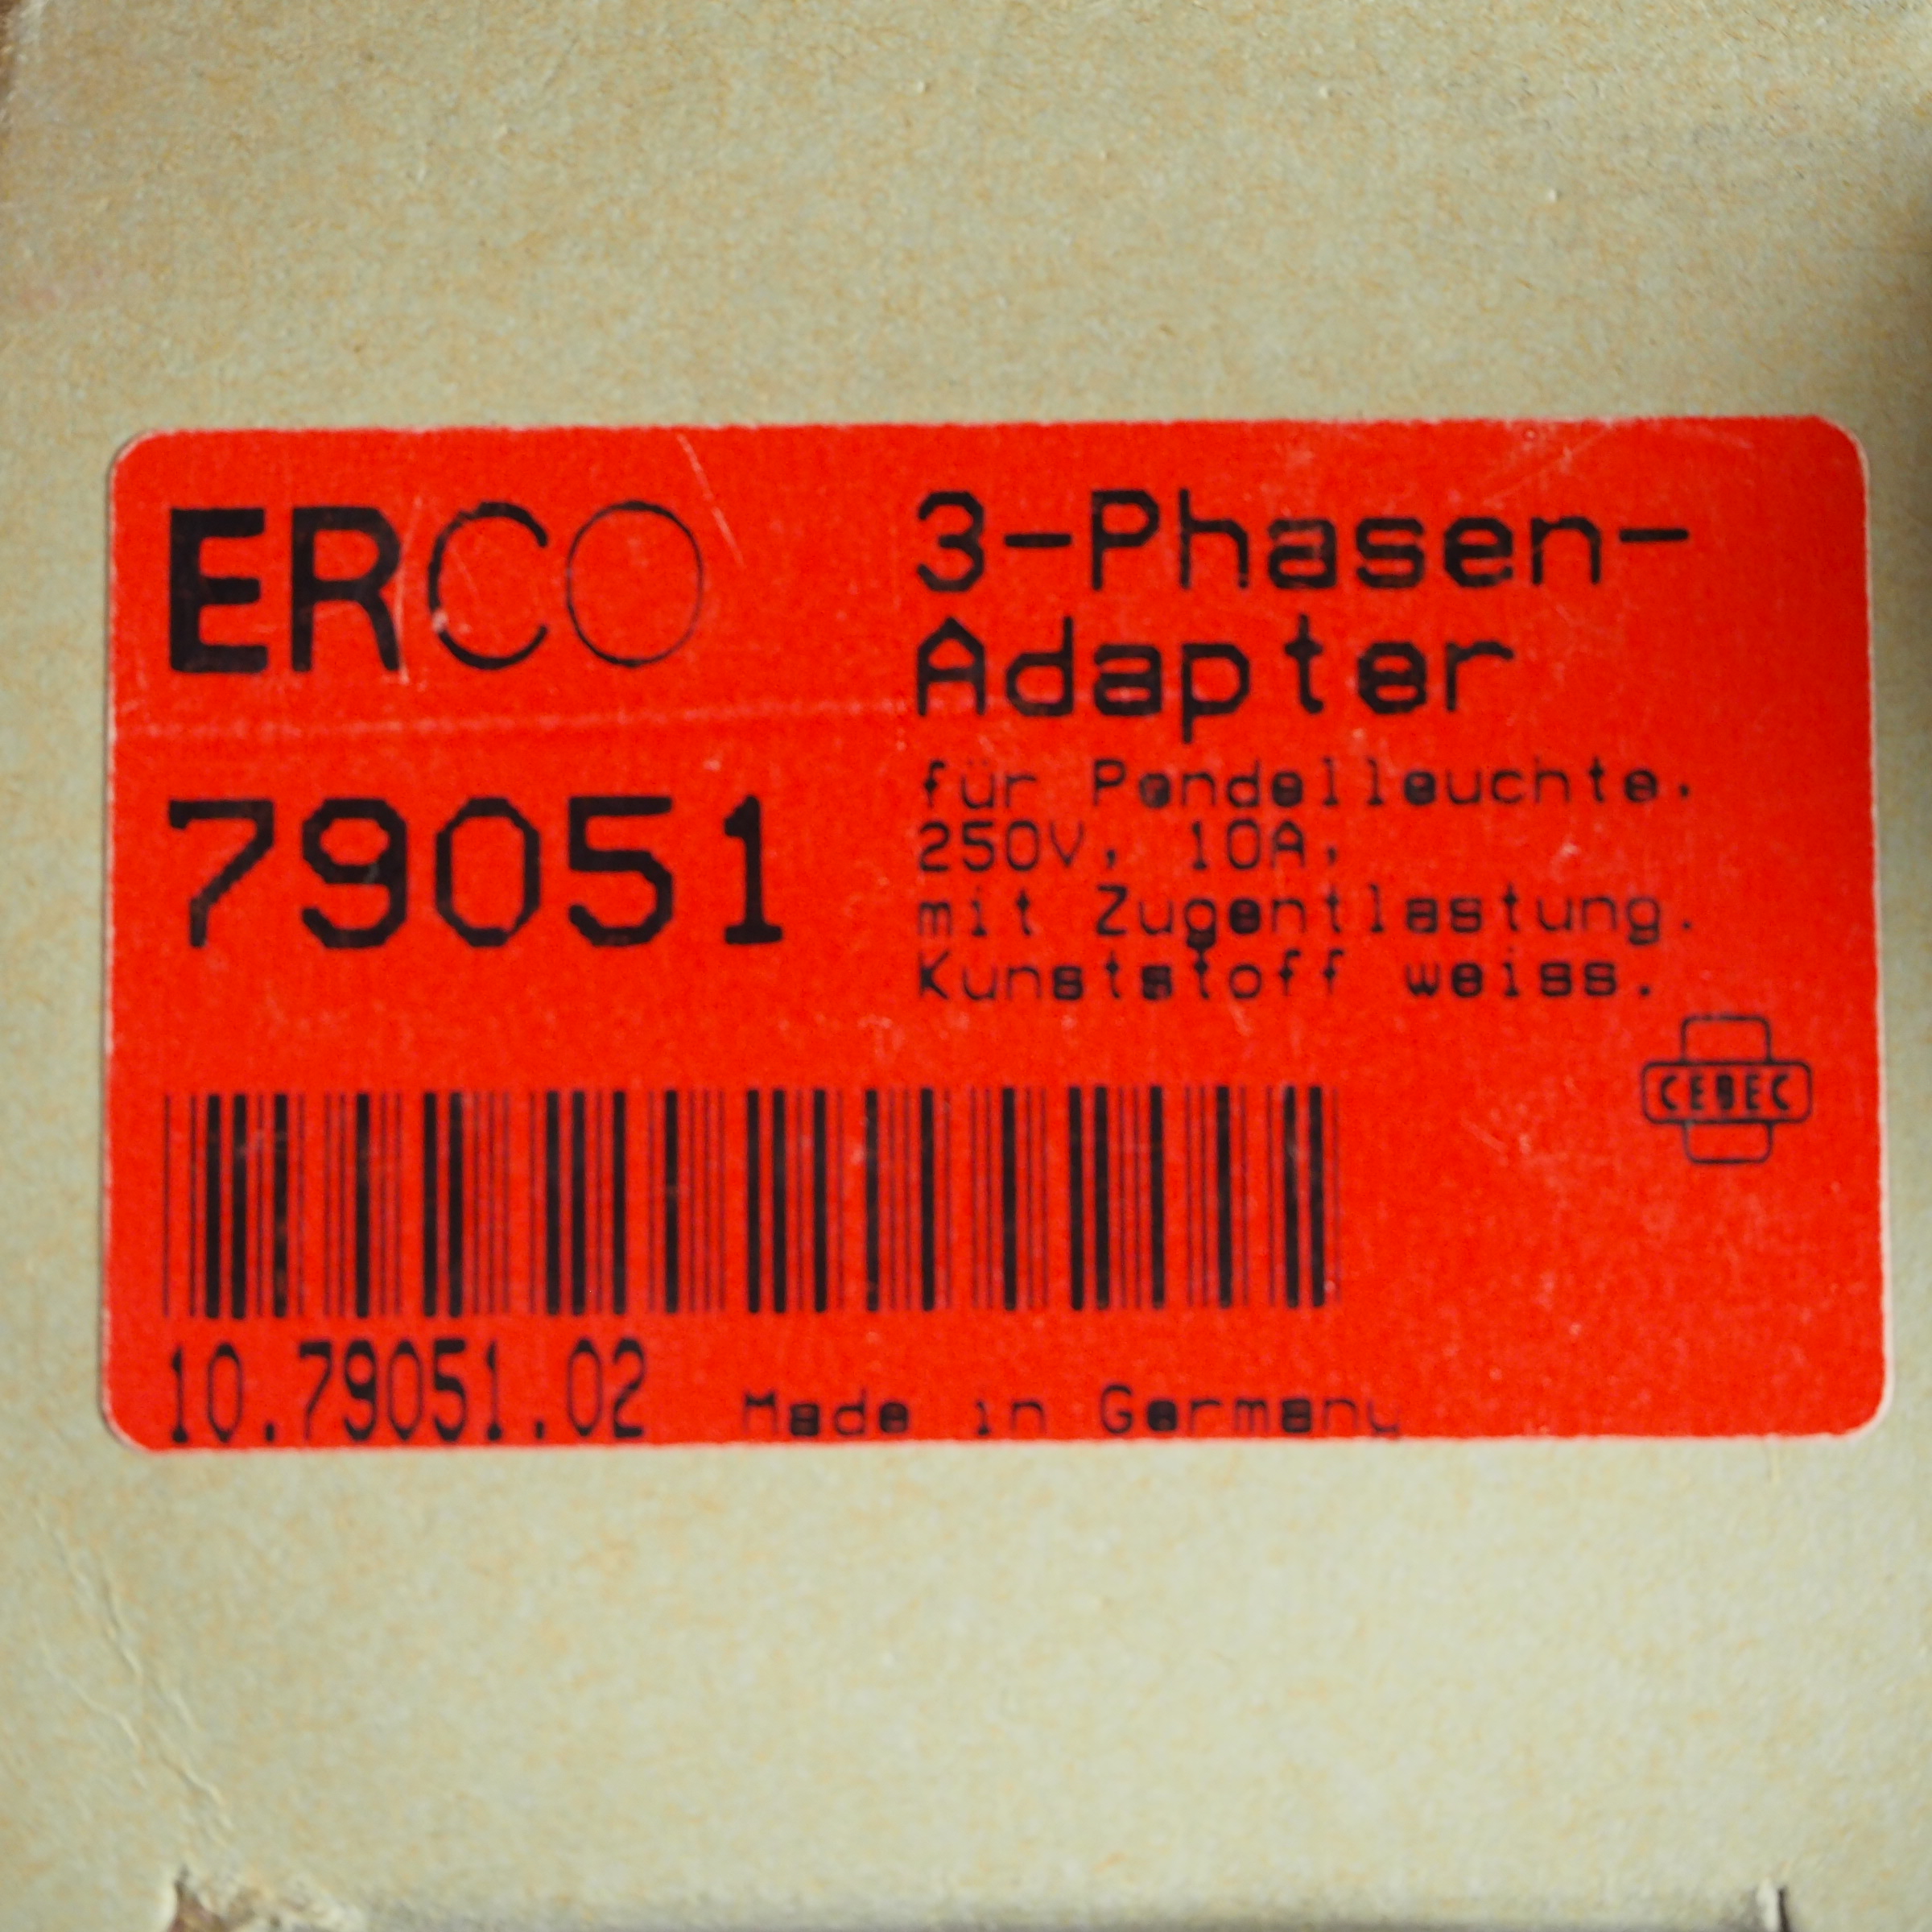 3 Phase adapter by Erco (79051)